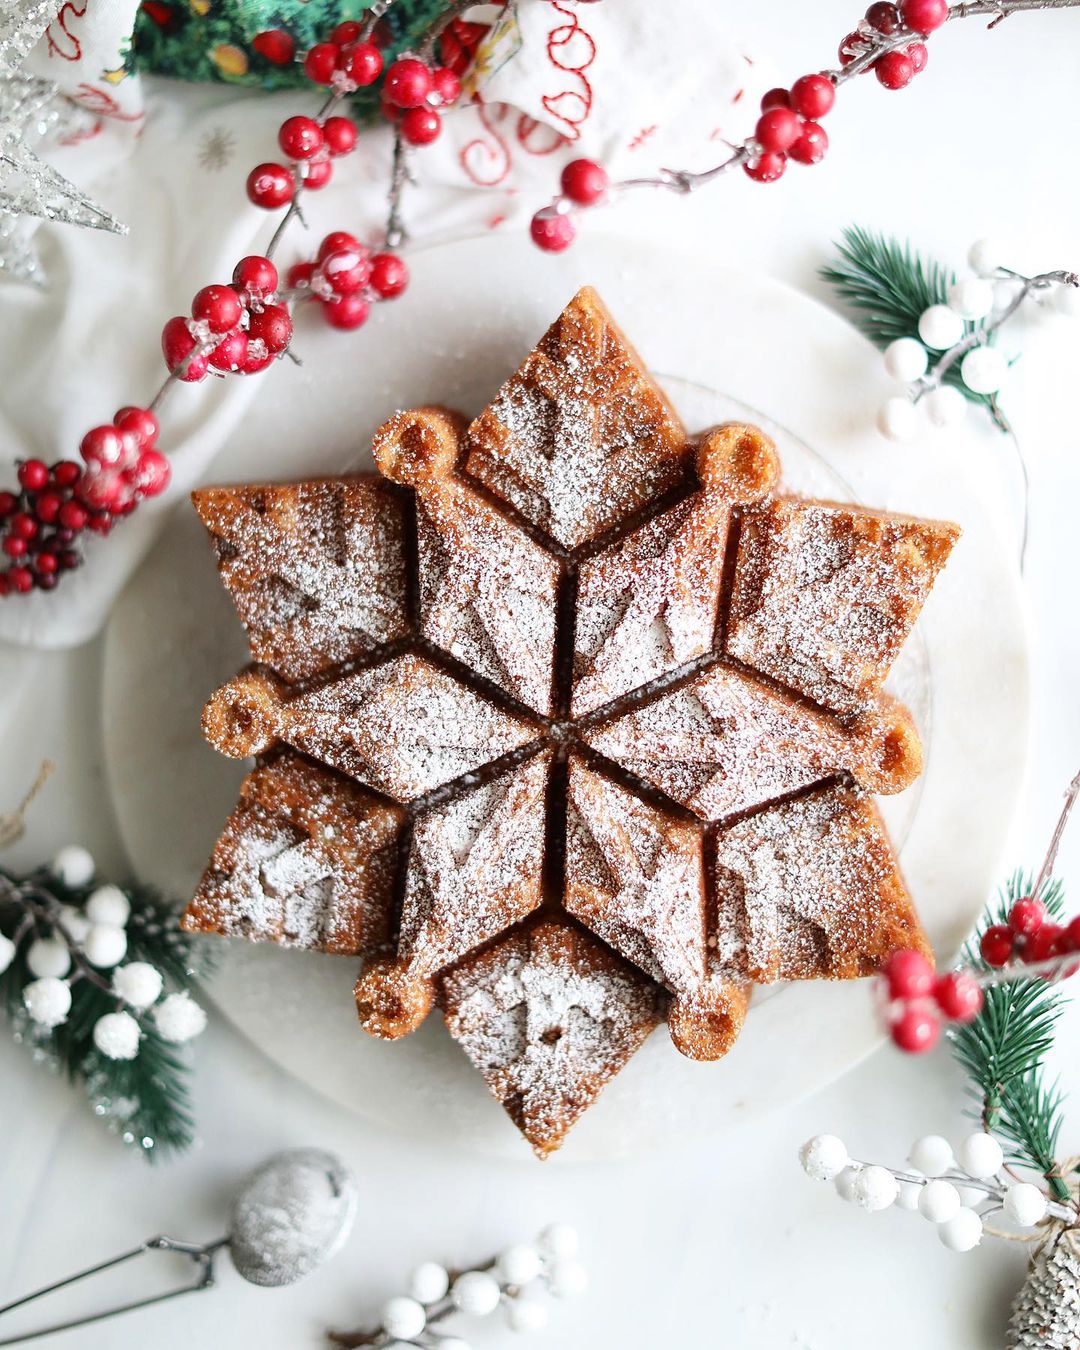 15 gorgeous christmas cakes to get you in the spirit